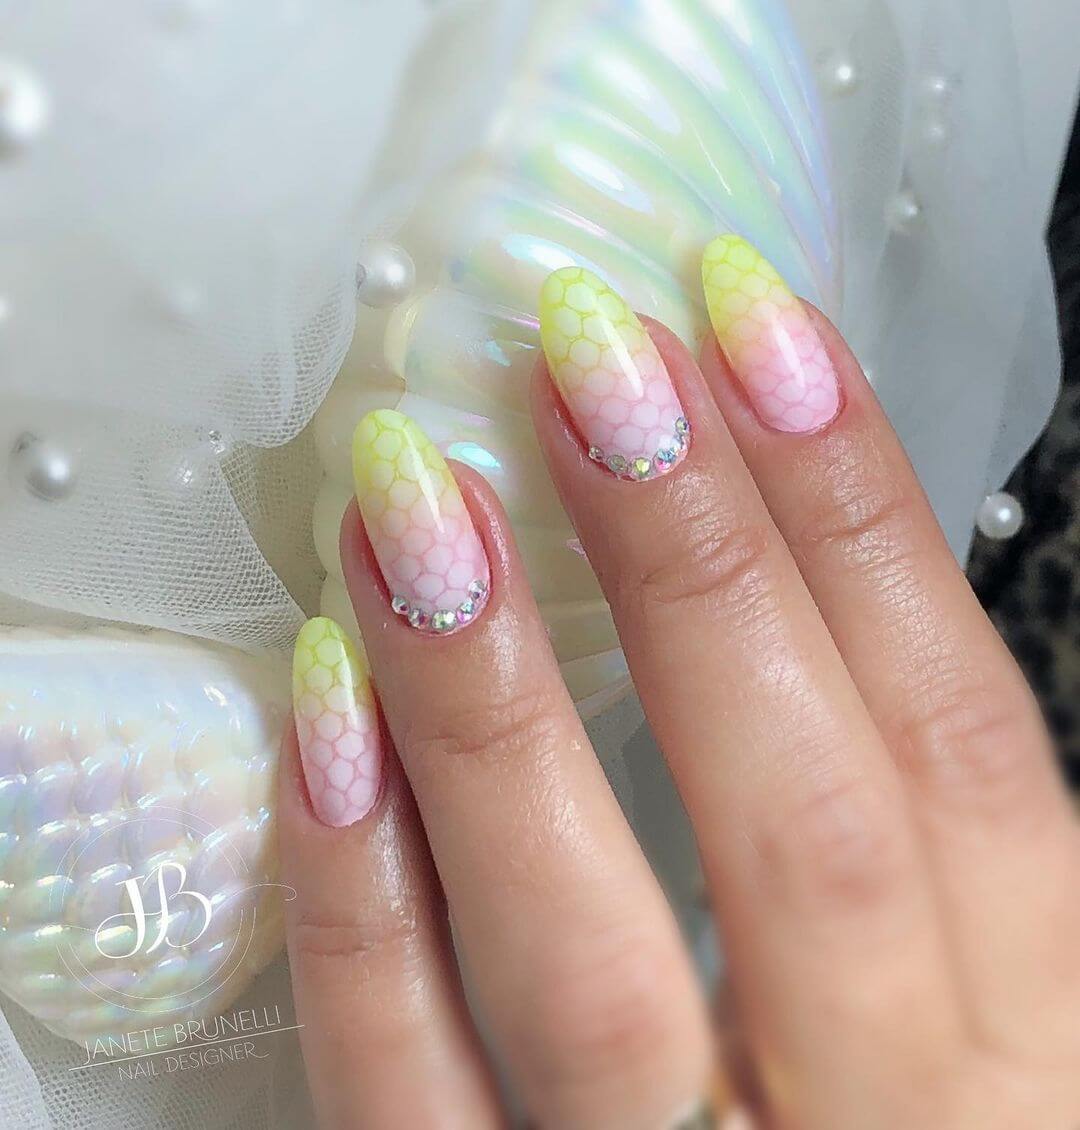 Airbrush Nail Art Designs Airbrush nail art design in yellow and pink